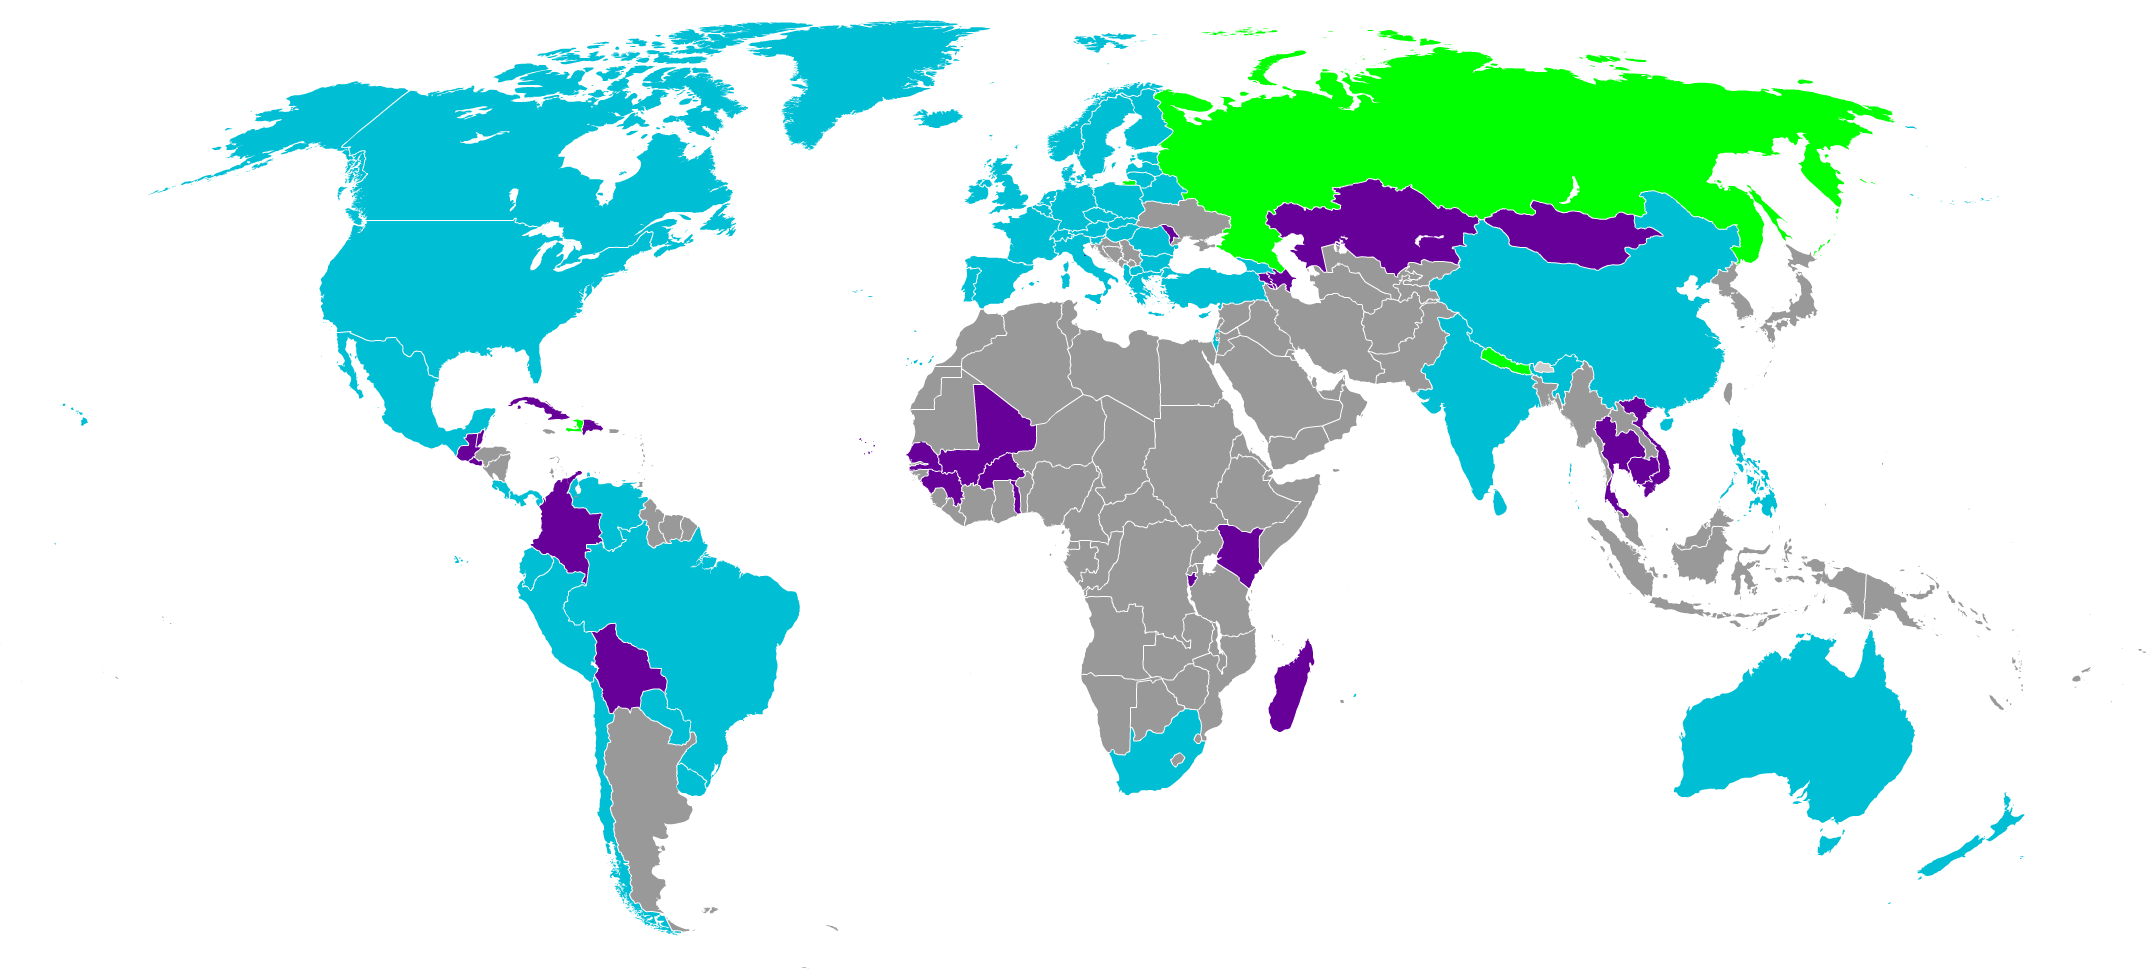 This is a map of the world with curtain countries highlighted